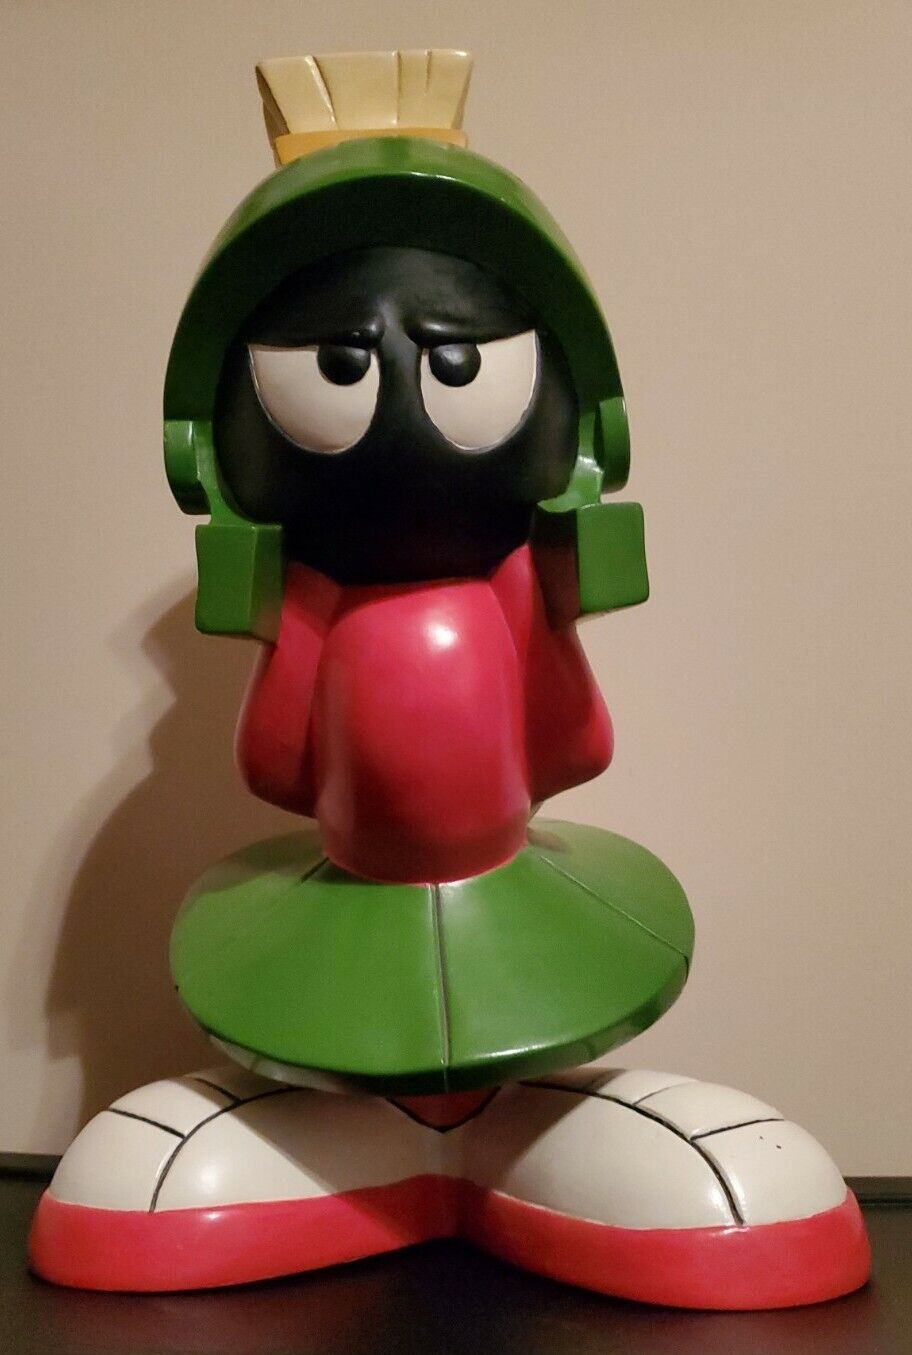 Extremely Rare Warner Bros Looney Tunes Marvin the Martian Big Figurine Statue 